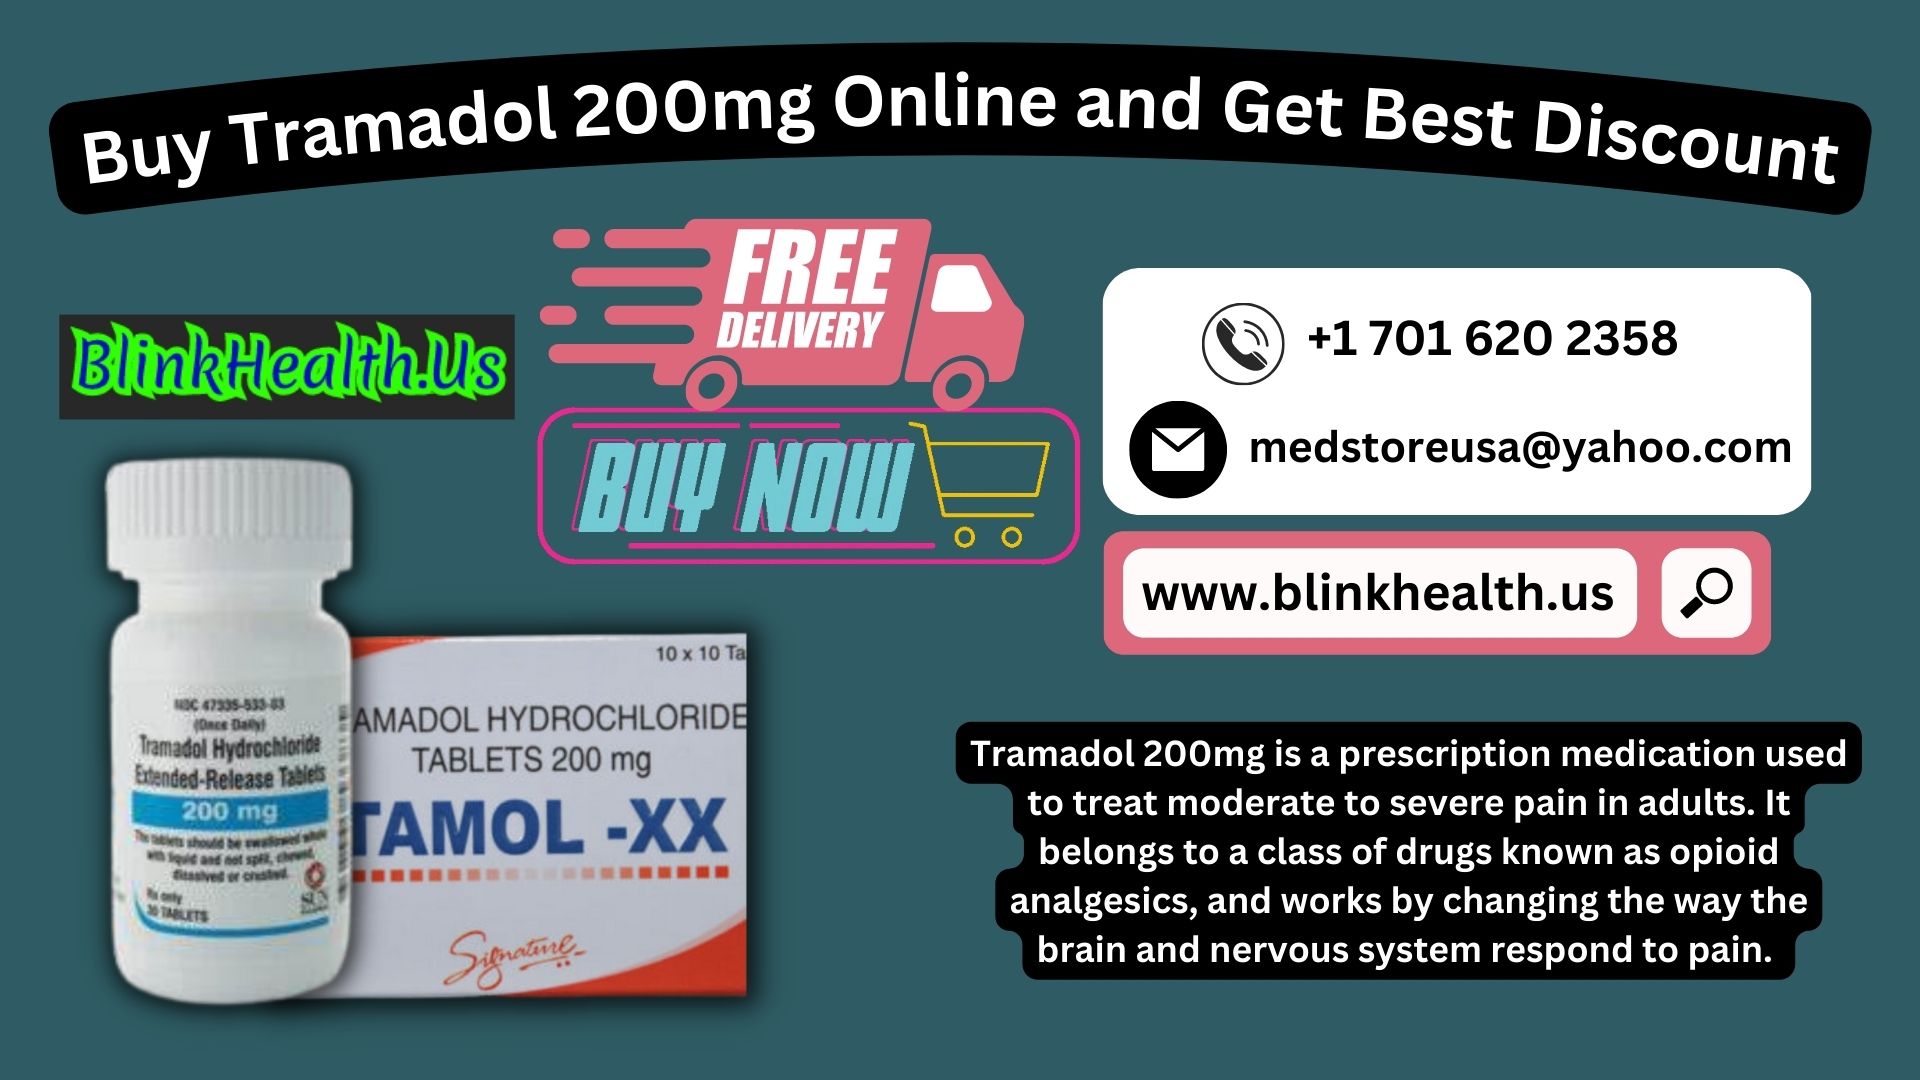 Shop Tramadol 200mg Online Without Prescription in USA